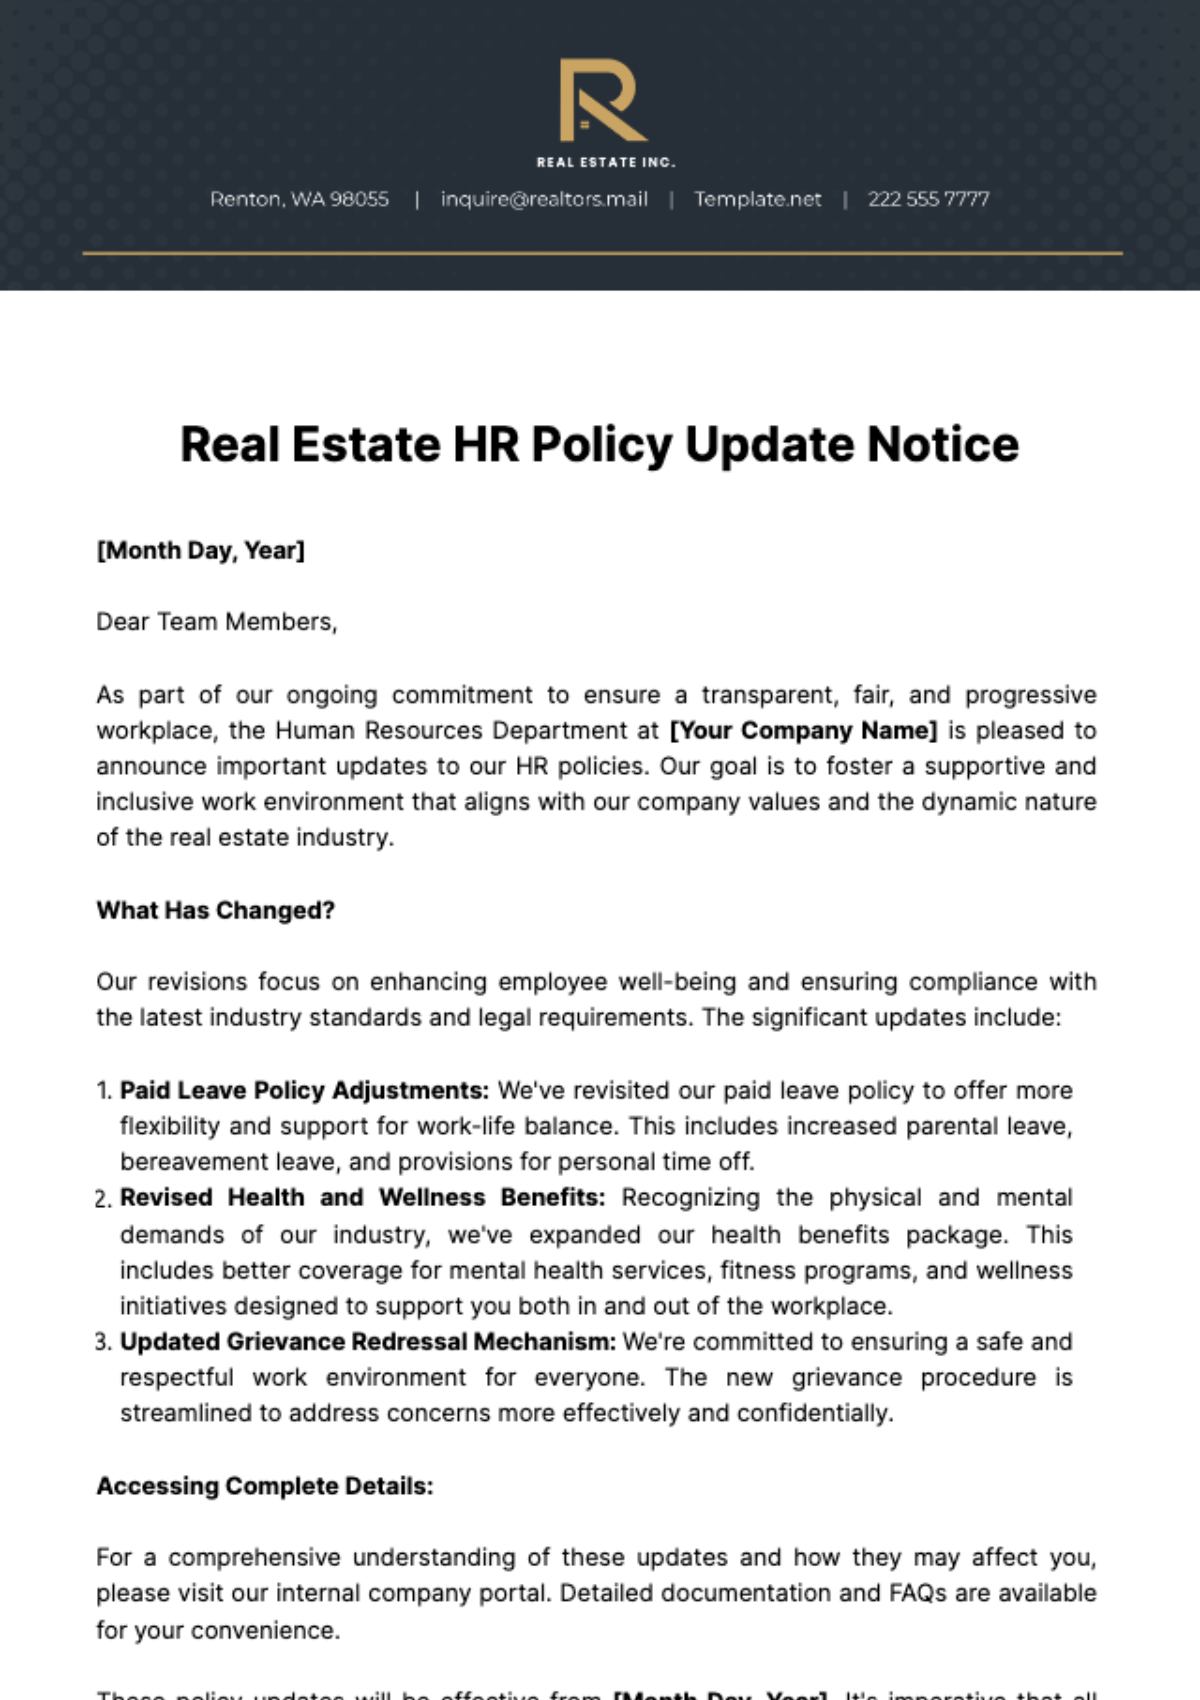 Real Estate HR Policy Update Notice Template